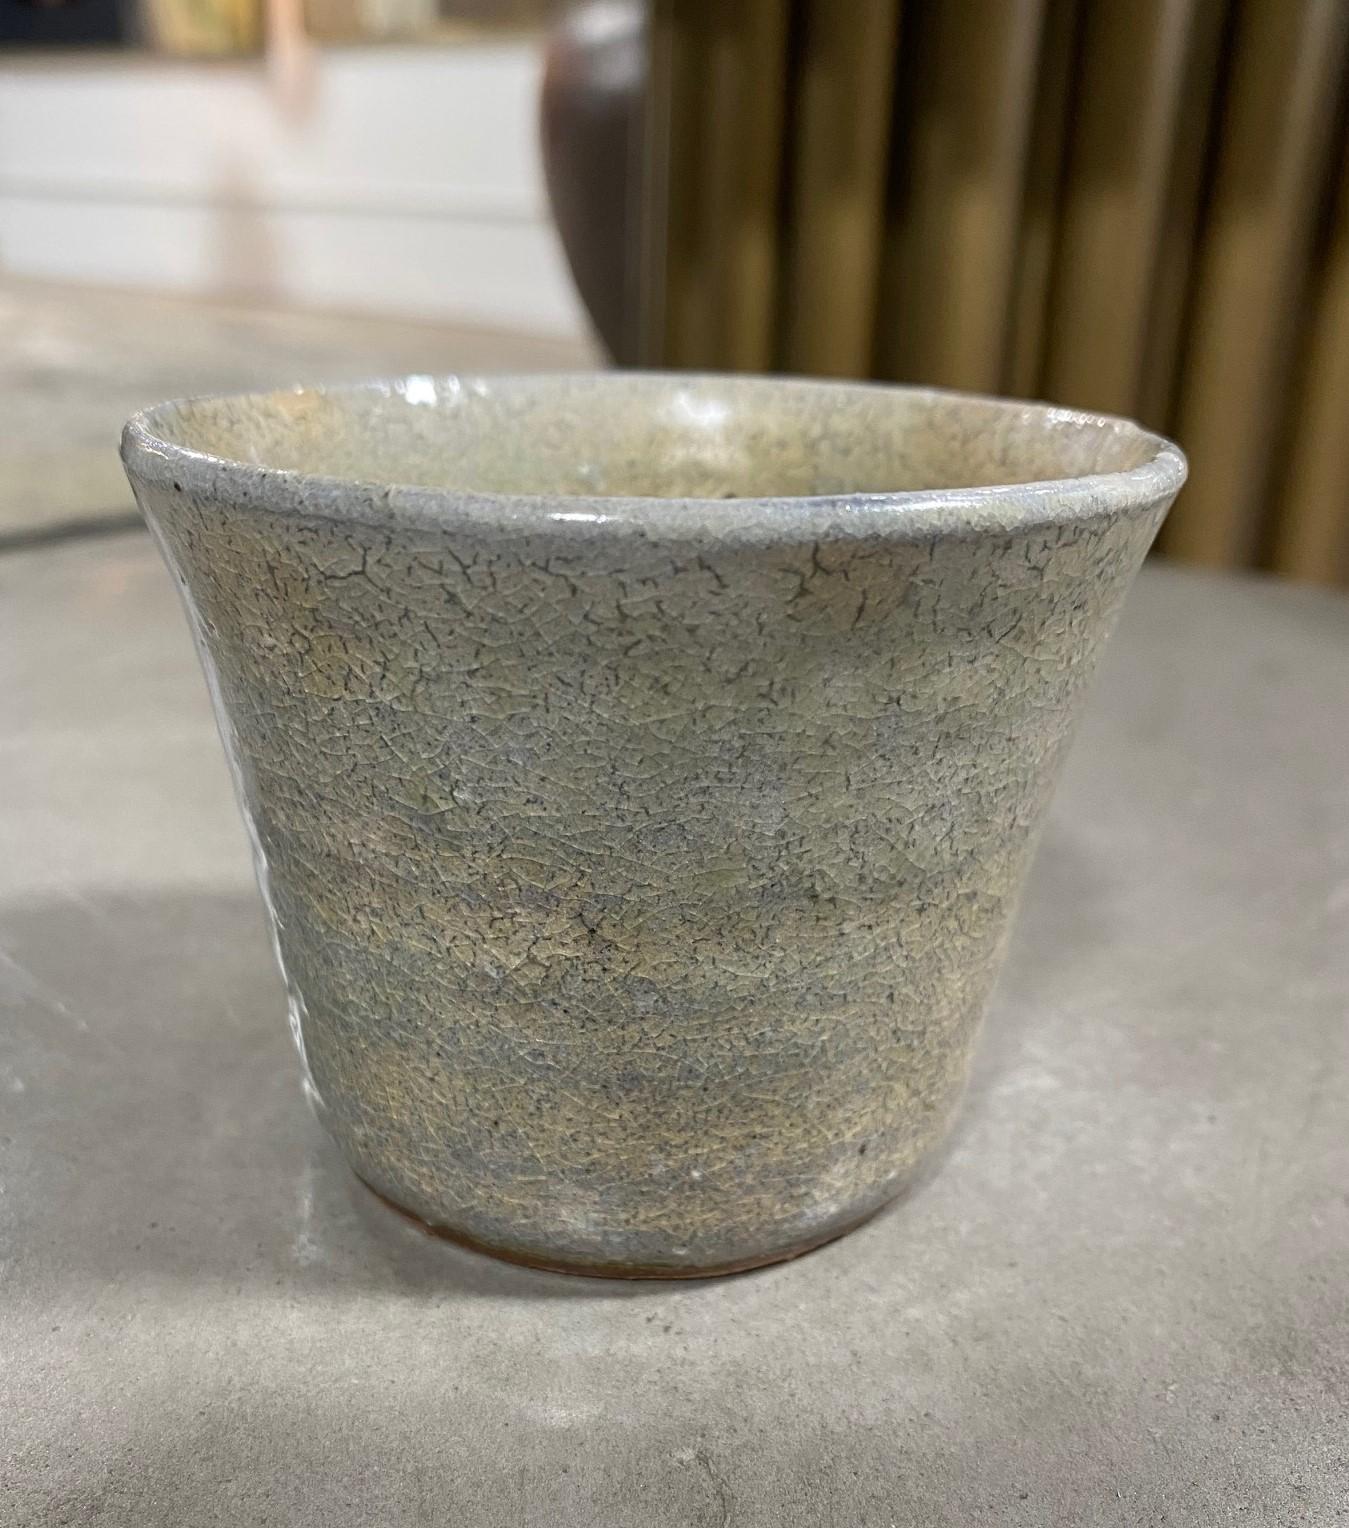 A beautiful Japanese yunomi teacup featuring a subtle blue-green crackle glaze. The work radiates in the light. 

This little gem (along with others we will be listing) came from a collector of fine Japanese and Asian ceramics - a collection like